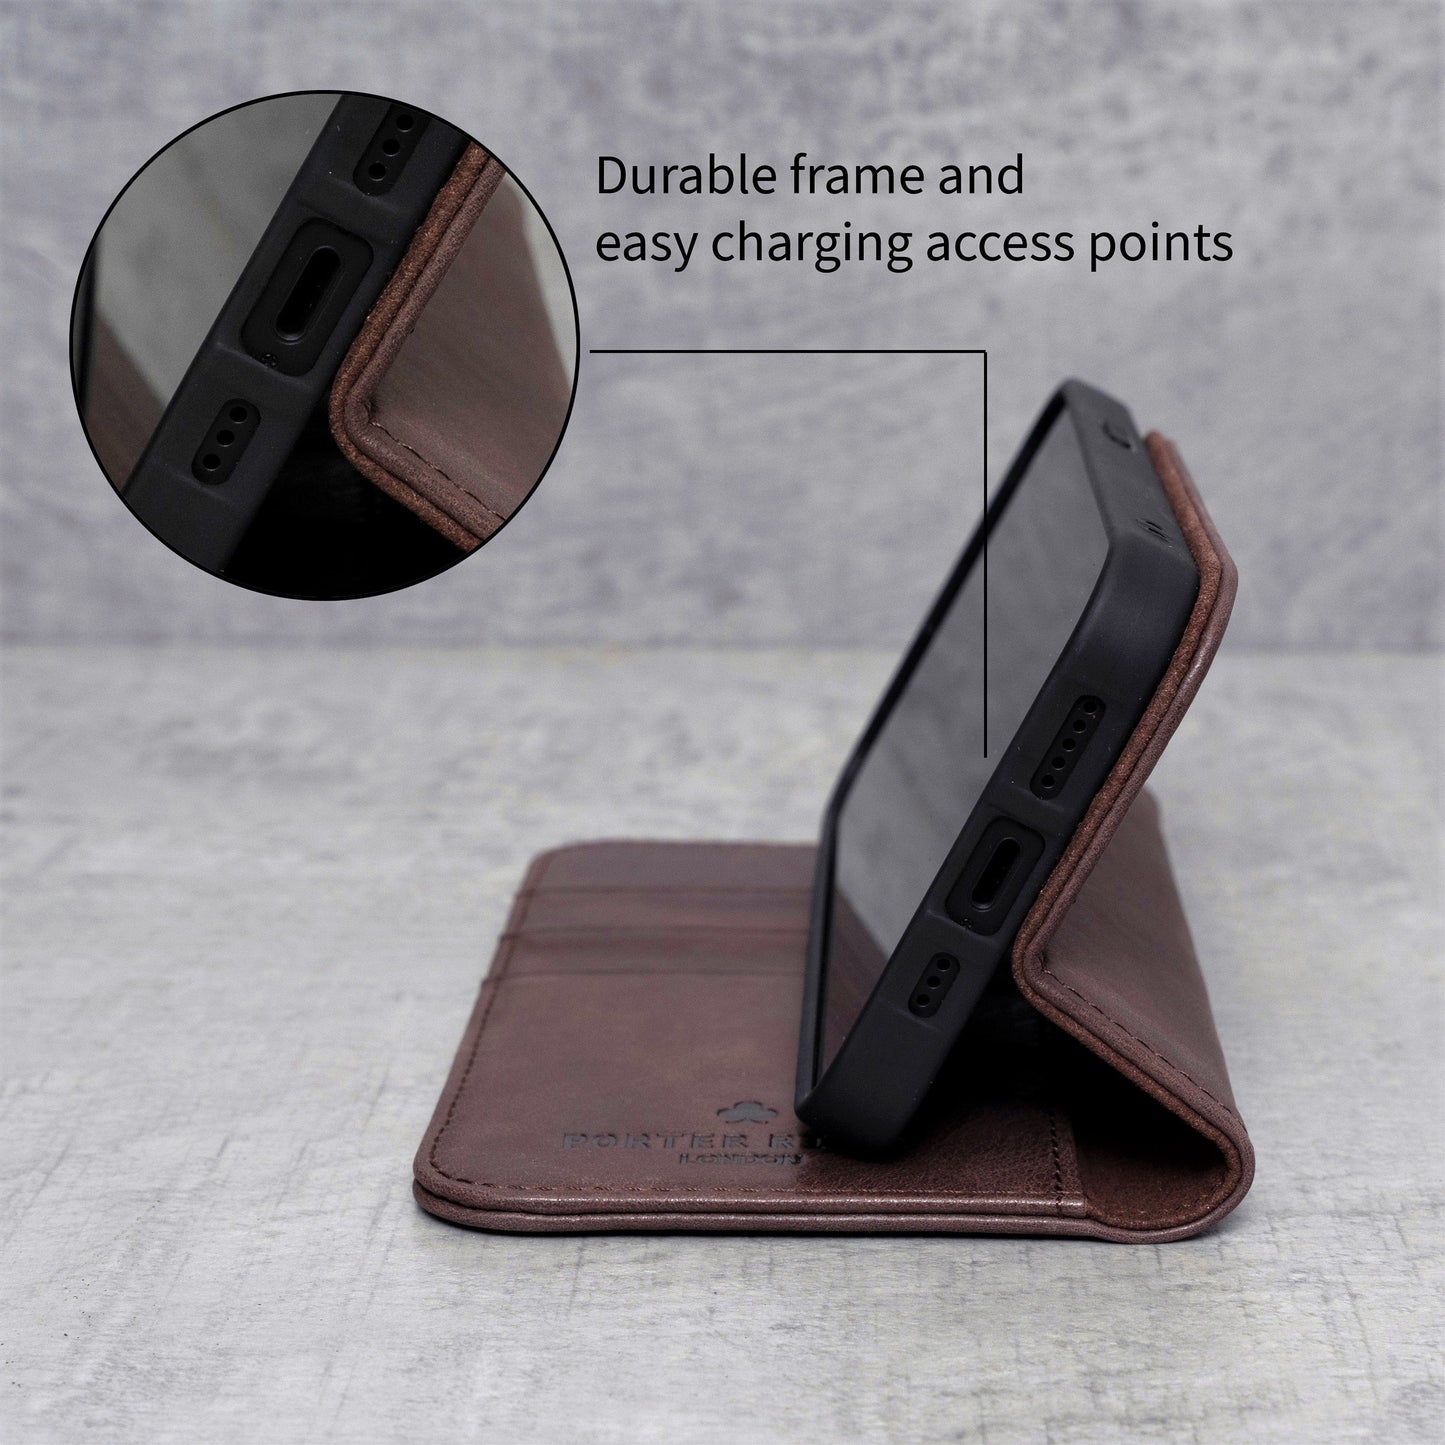 Samsung Galaxy S21 Plus Leather Case. Premium Slim Genuine Leather Stand Case/Cover/Wallet (Chocolate Brown)